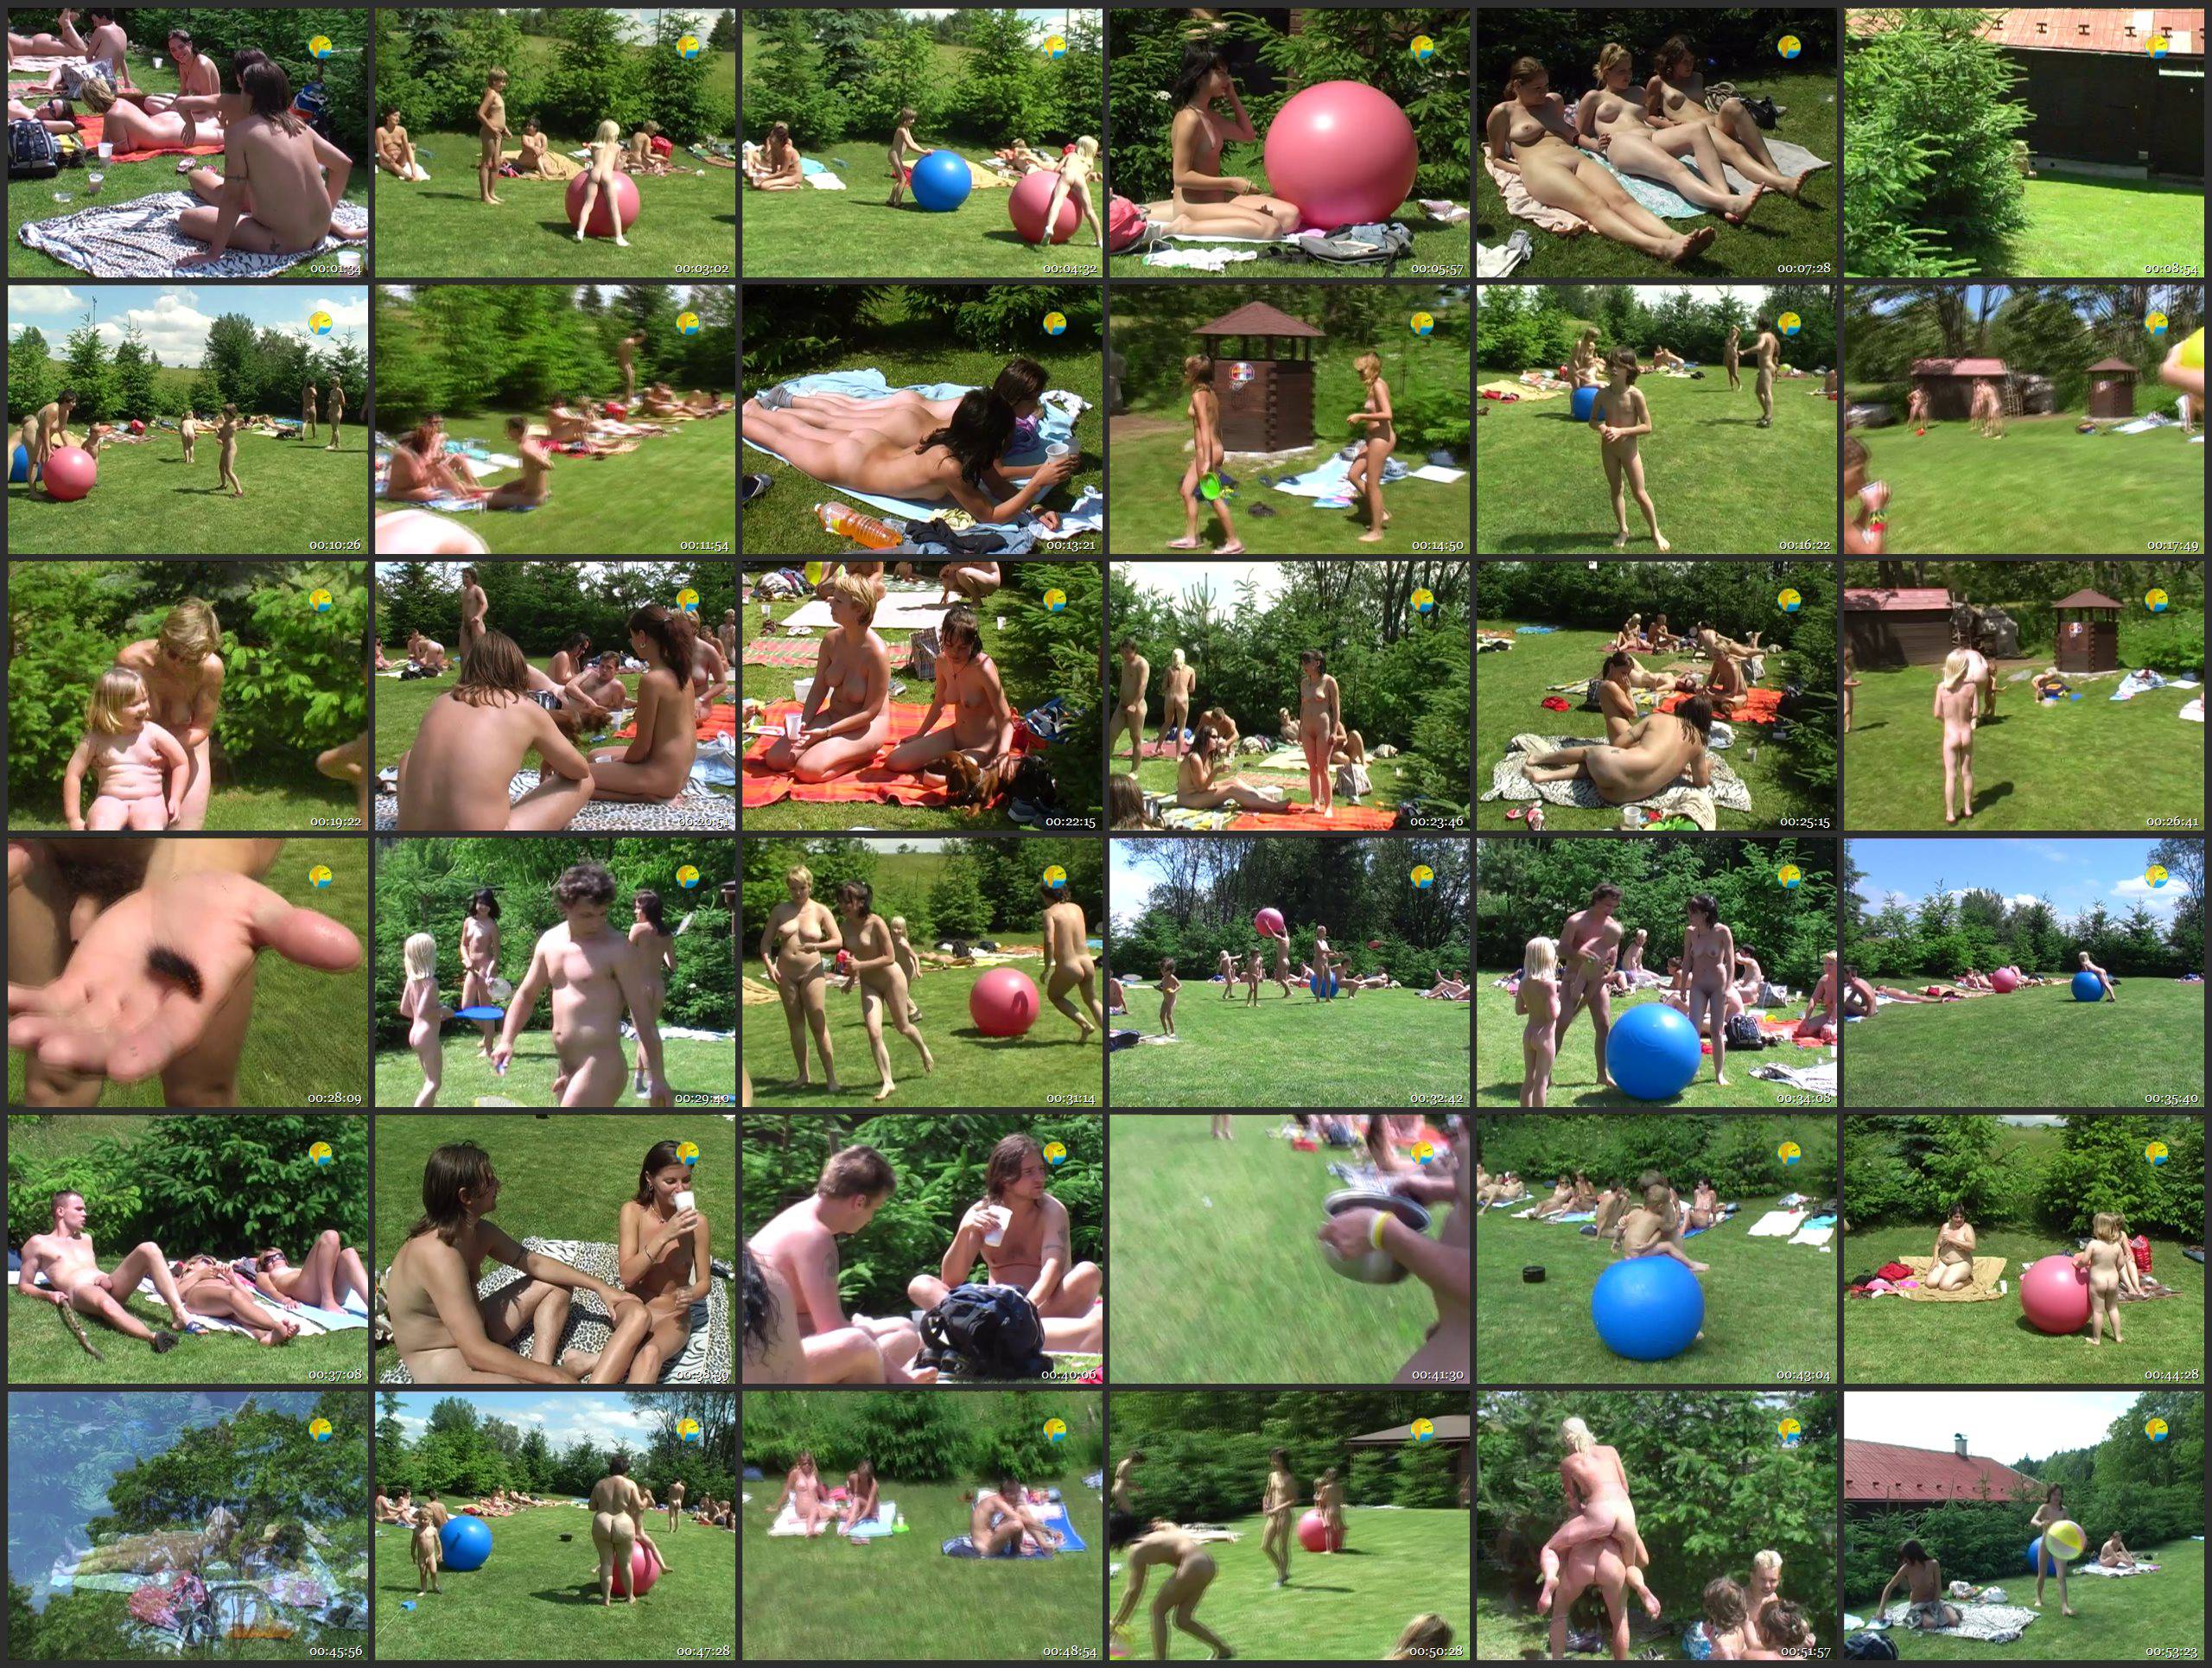 Naturist Freedom-You can never get enough Sunbathing - Thumbnails